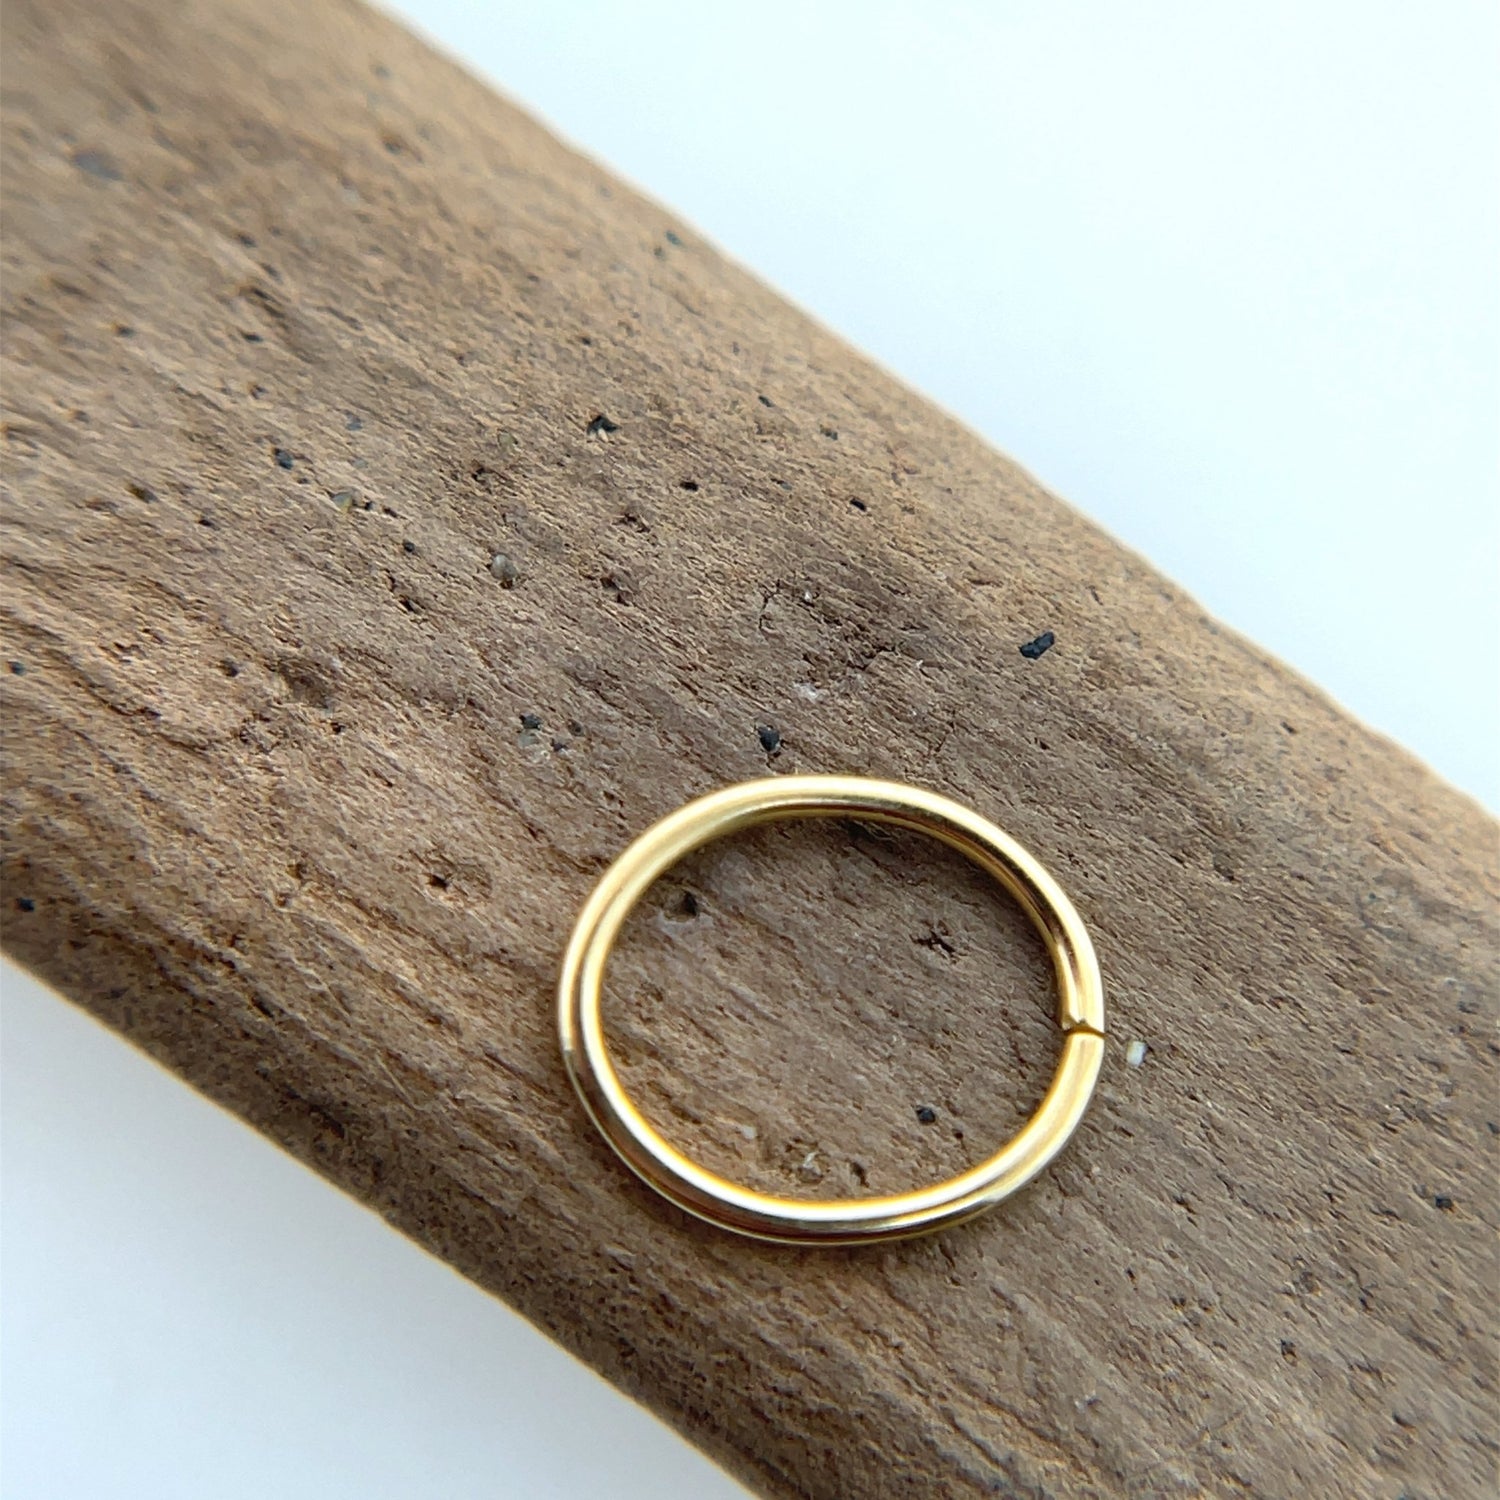 20g 14K Gold Oval Seam Ring - Agave in Bloom